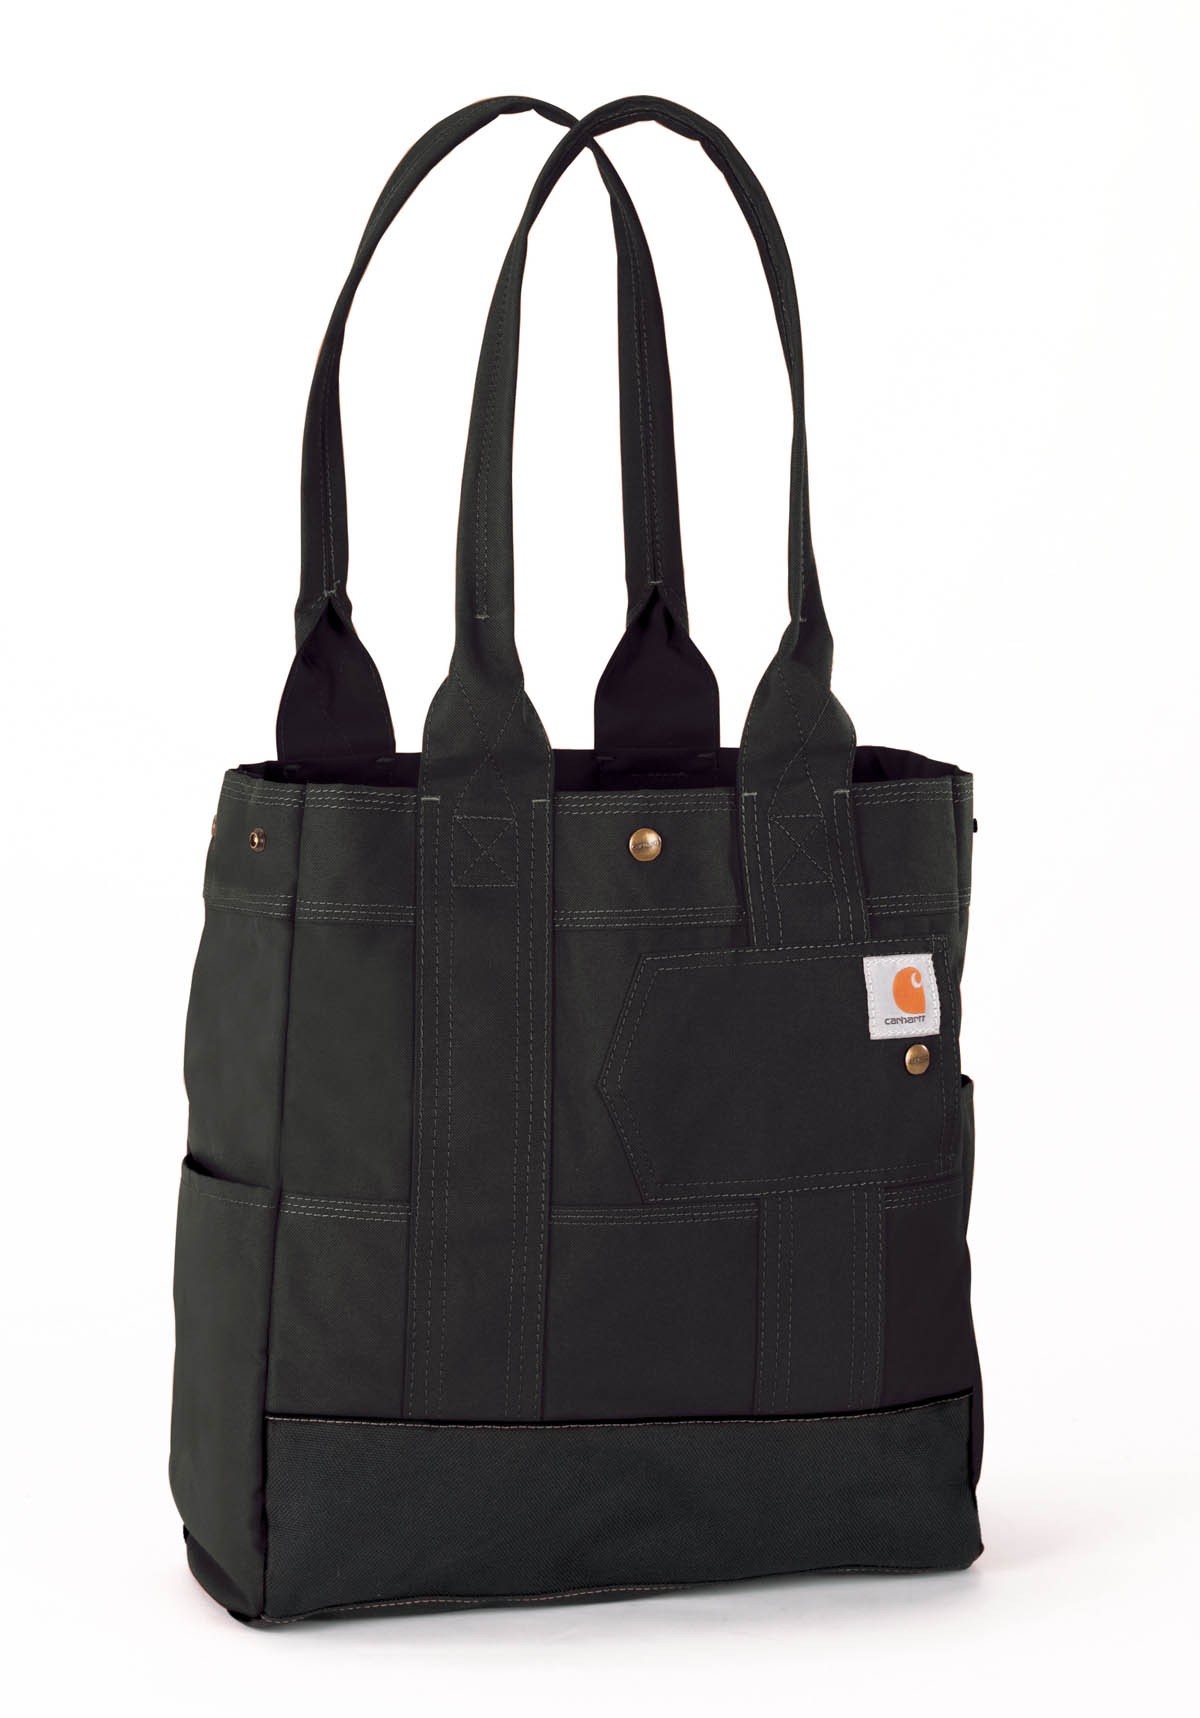 Carhartt Women's North South Tote